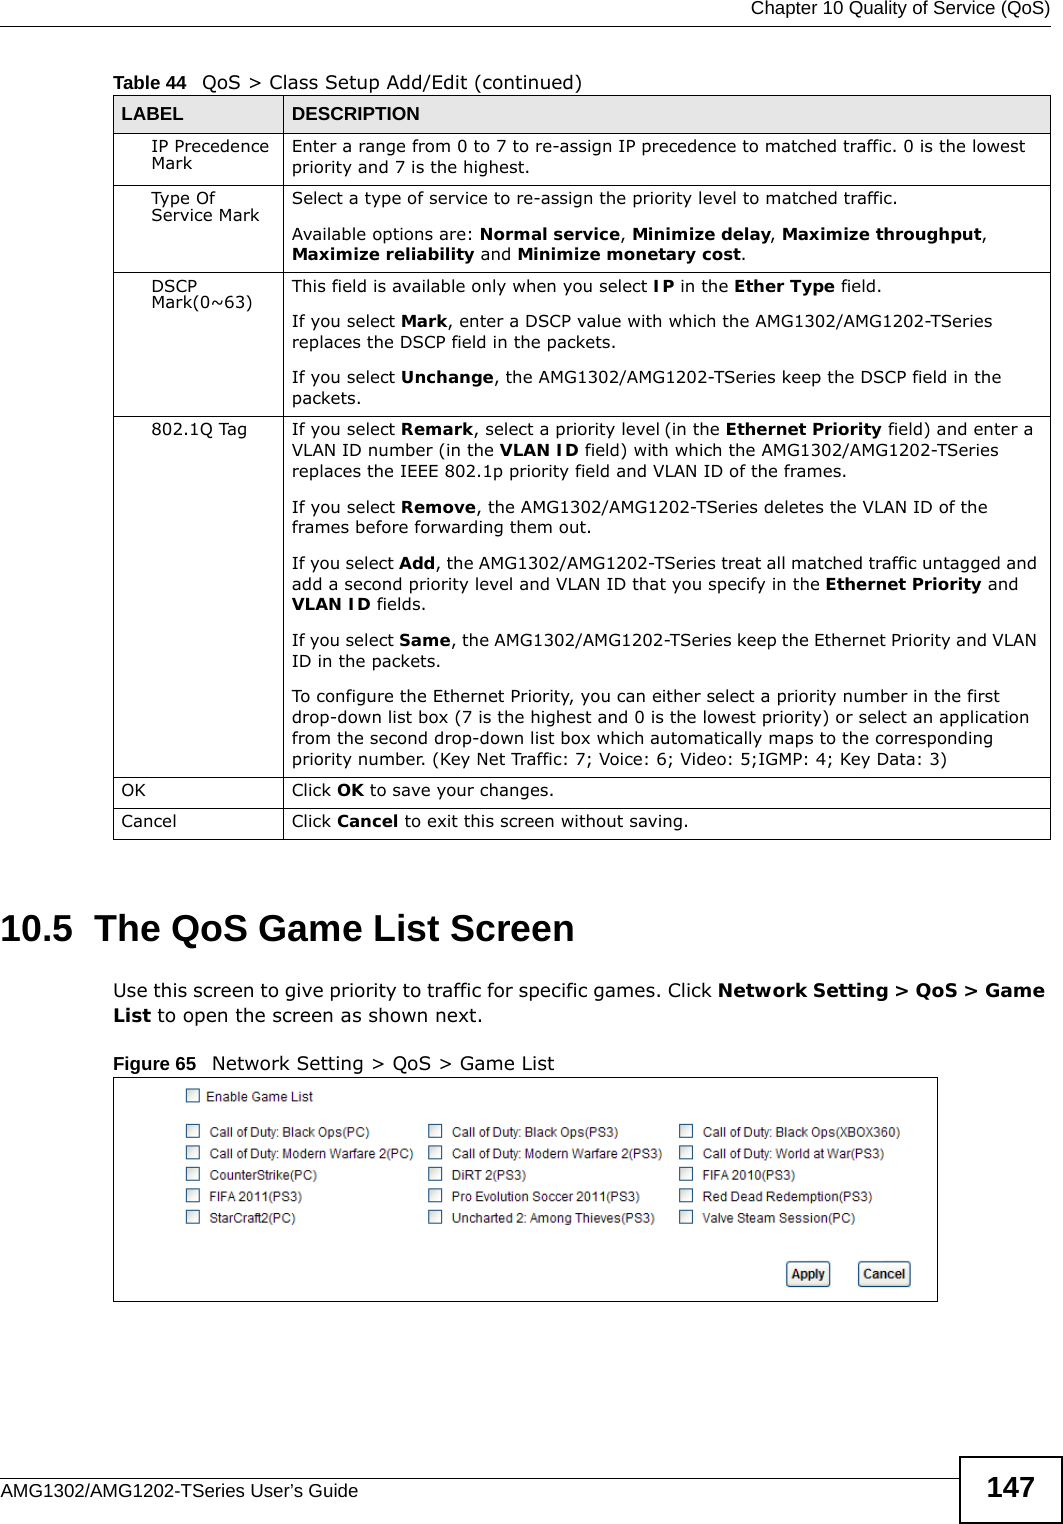  Chapter 10 Quality of Service (QoS)AMG1302/AMG1202-TSeries User’s Guide 14710.5  The QoS Game List Screen Use this screen to give priority to traffic for specific games. Click Network Setting &gt; QoS &gt; Game List to open the screen as shown next.Figure 65   Network Setting &gt; QoS &gt; Game ListIP Precedence Mark Enter a range from 0 to 7 to re-assign IP precedence to matched traffic. 0 is the lowest priority and 7 is the highest.Type Of Service Mark Select a type of service to re-assign the priority level to matched traffic.Available options are: Normal service, Minimize delay, Maximize throughput, Maximize reliability and Minimize monetary cost.DSCP Mark(0~63) This field is available only when you select IP in the Ether Type field.If you select Mark, enter a DSCP value with which the AMG1302/AMG1202-TSeries replaces the DSCP field in the packets.If you select Unchange, the AMG1302/AMG1202-TSeries keep the DSCP field in the packets.802.1Q Tag If you select Remark, select a priority level (in the Ethernet Priority field) and enter a VLAN ID number (in the VLAN ID field) with which the AMG1302/AMG1202-TSeries replaces the IEEE 802.1p priority field and VLAN ID of the frames.If you select Remove, the AMG1302/AMG1202-TSeries deletes the VLAN ID of the frames before forwarding them out.If you select Add, the AMG1302/AMG1202-TSeries treat all matched traffic untagged and add a second priority level and VLAN ID that you specify in the Ethernet Priority and VLAN ID fields.If you select Same, the AMG1302/AMG1202-TSeries keep the Ethernet Priority and VLAN ID in the packets.To configure the Ethernet Priority, you can either select a priority number in the first drop-down list box (7 is the highest and 0 is the lowest priority) or select an application from the second drop-down list box which automatically maps to the corresponding priority number. (Key Net Traffic: 7; Voice: 6; Video: 5;IGMP: 4; Key Data: 3)OK Click OK to save your changes.Cancel Click Cancel to exit this screen without saving.Table 44   QoS &gt; Class Setup Add/Edit (continued)LABEL DESCRIPTION